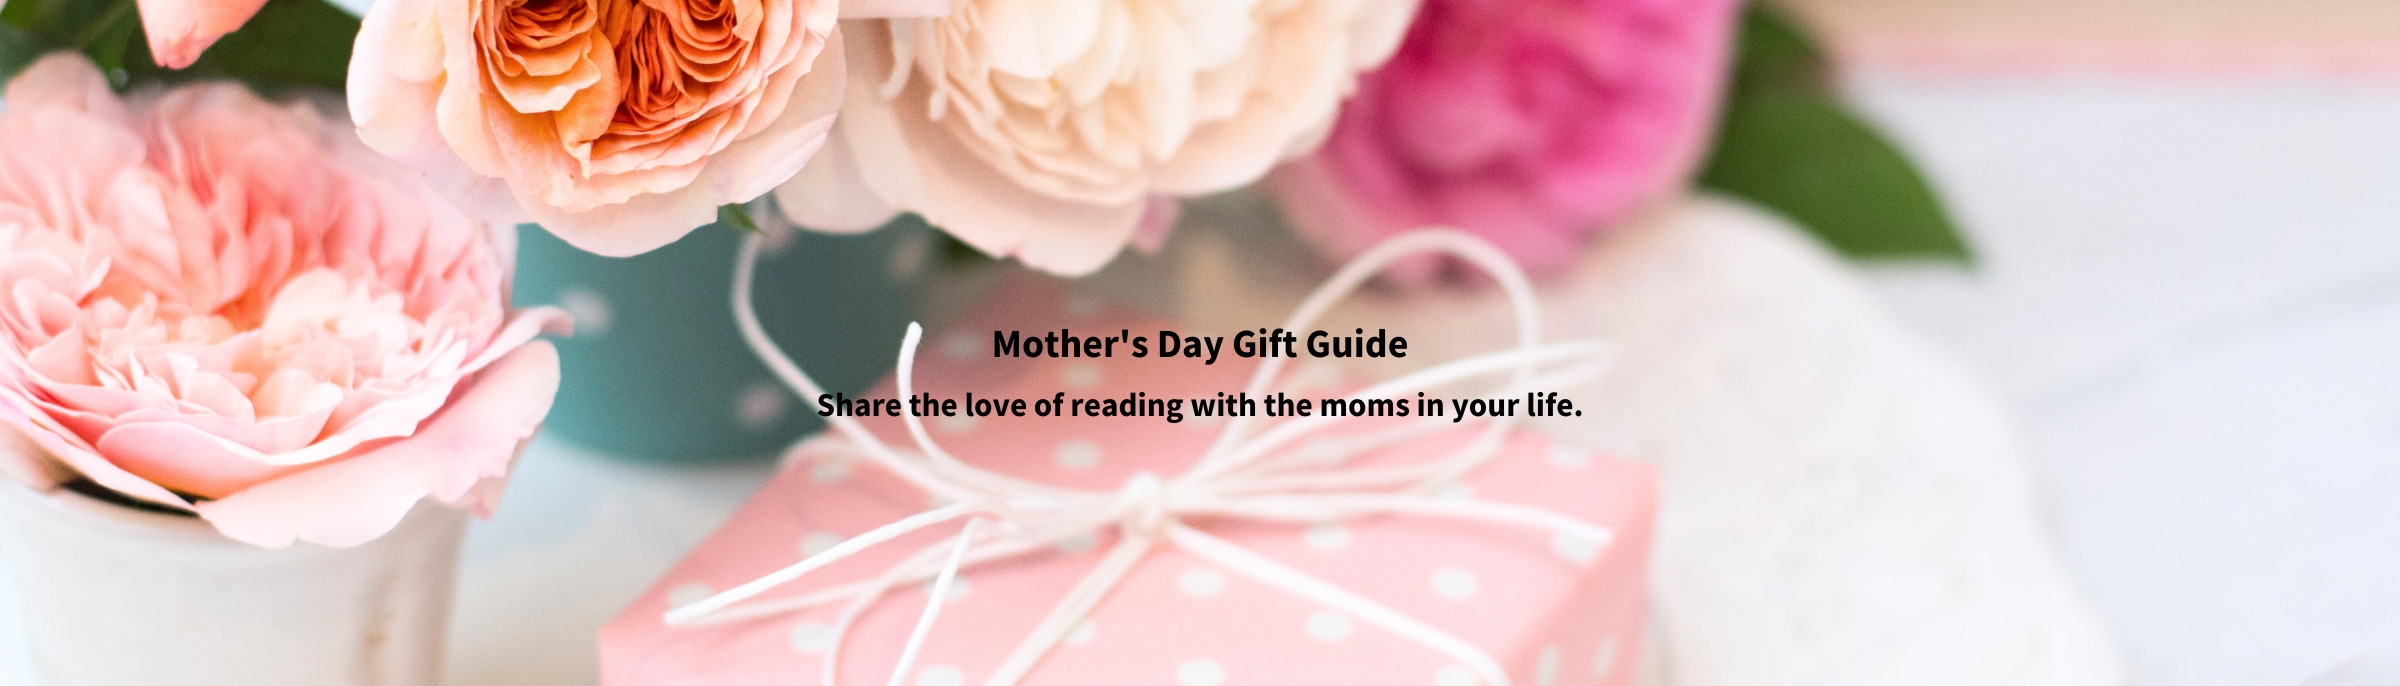 Mother's Day Gift Guide
Share the love of reading with the moms in your life.